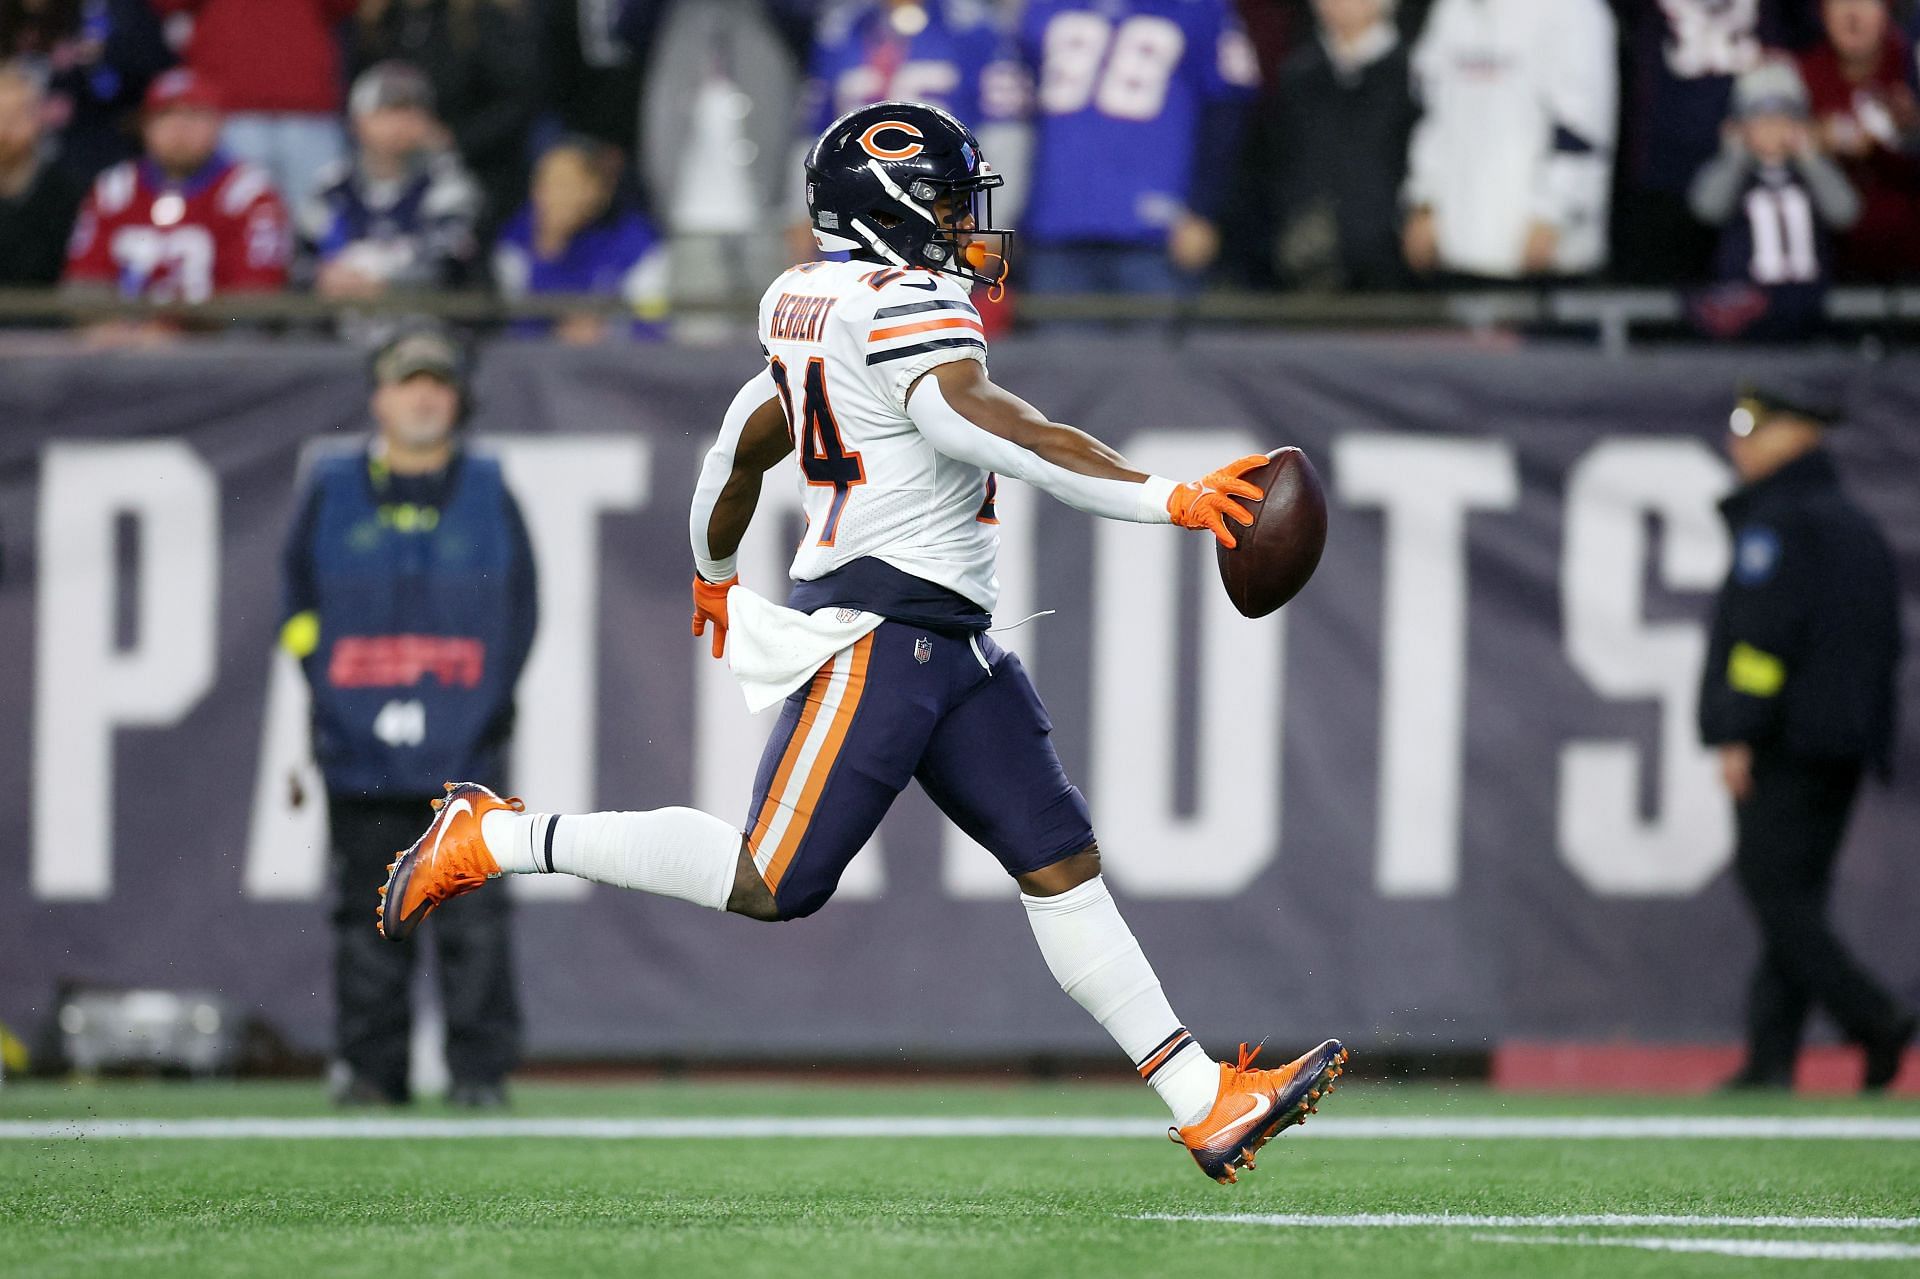 ESPN on X: The Bears dominated the Pats on #MNF 